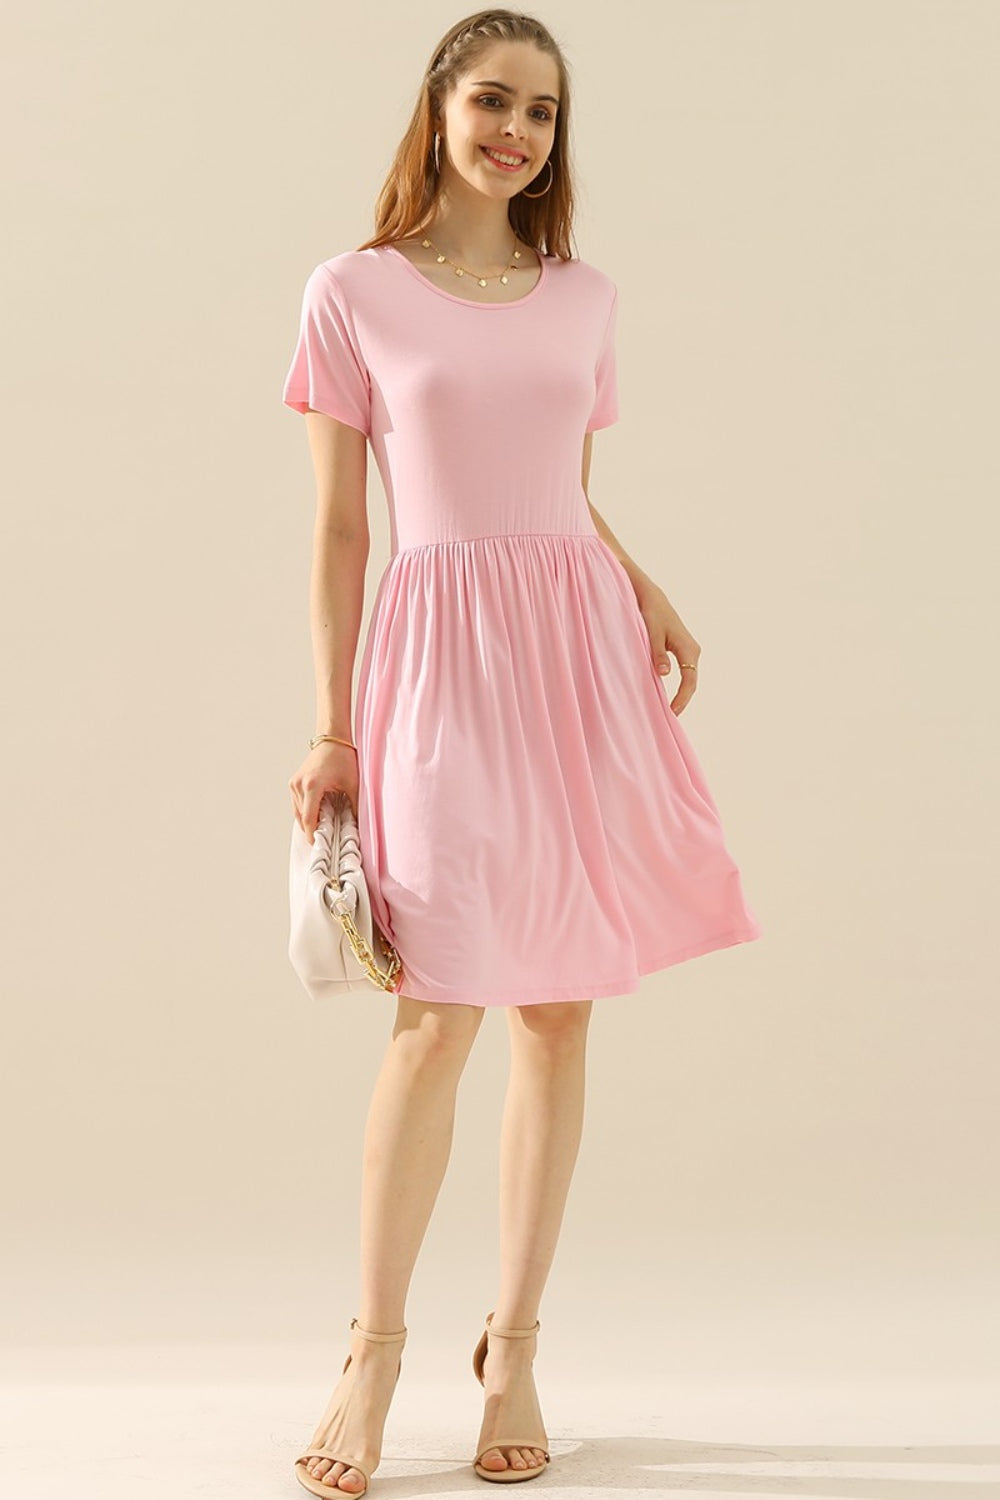 Elegant Beach Wedding Guest Attire: Women's Full-Size Ruched Dress with Pockets